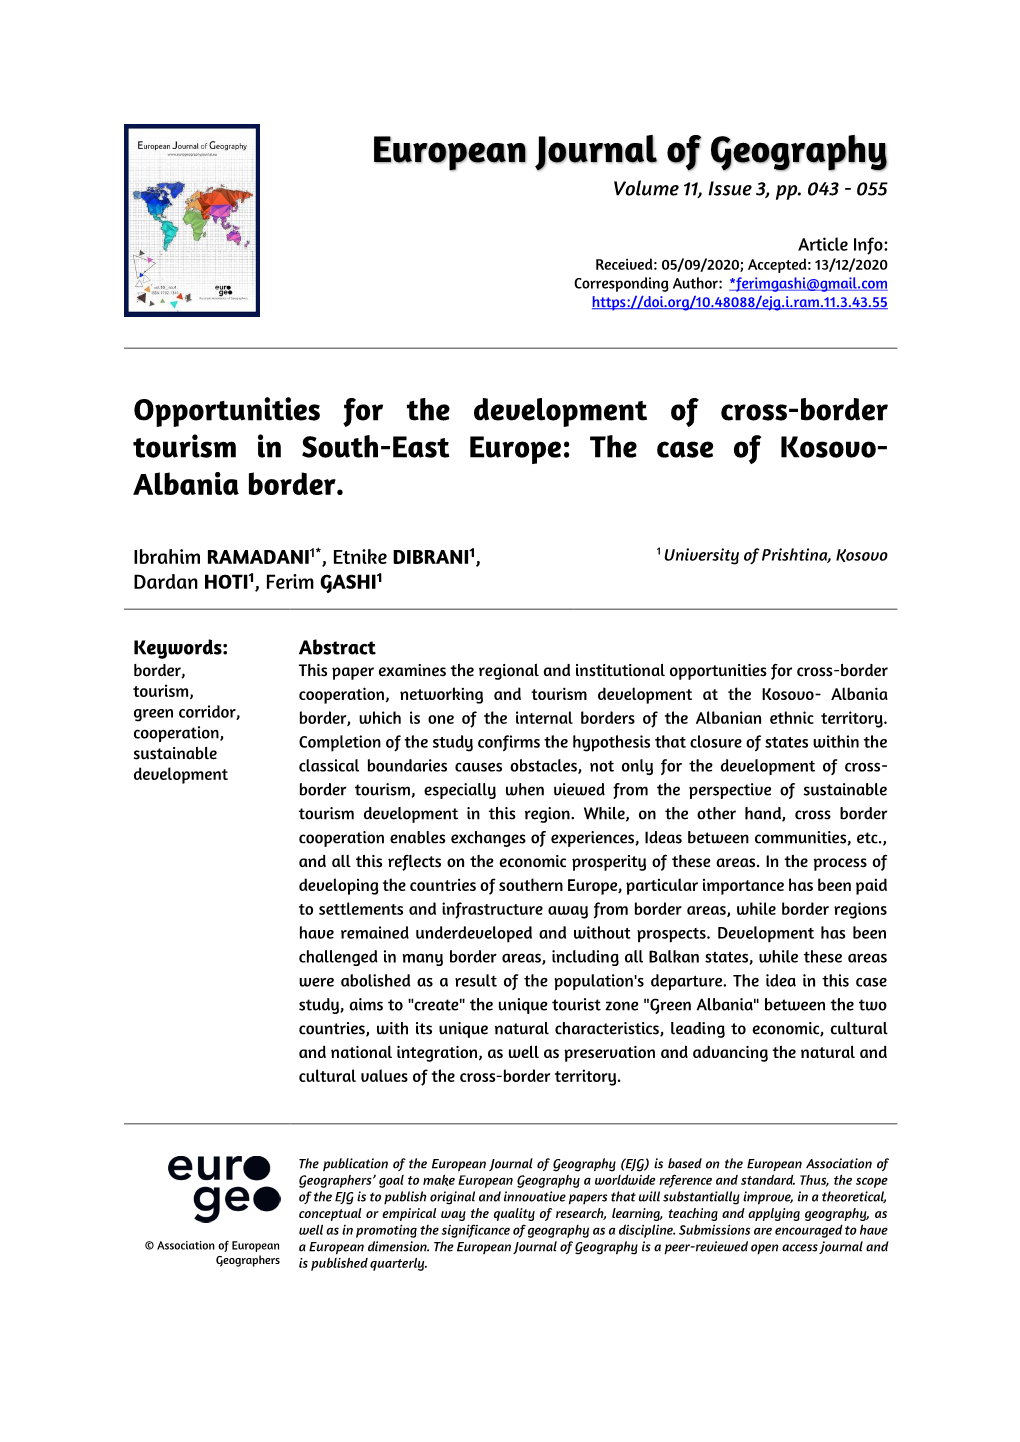 The Key Factor for a Successful Territorial Cohesion: Cross-Border